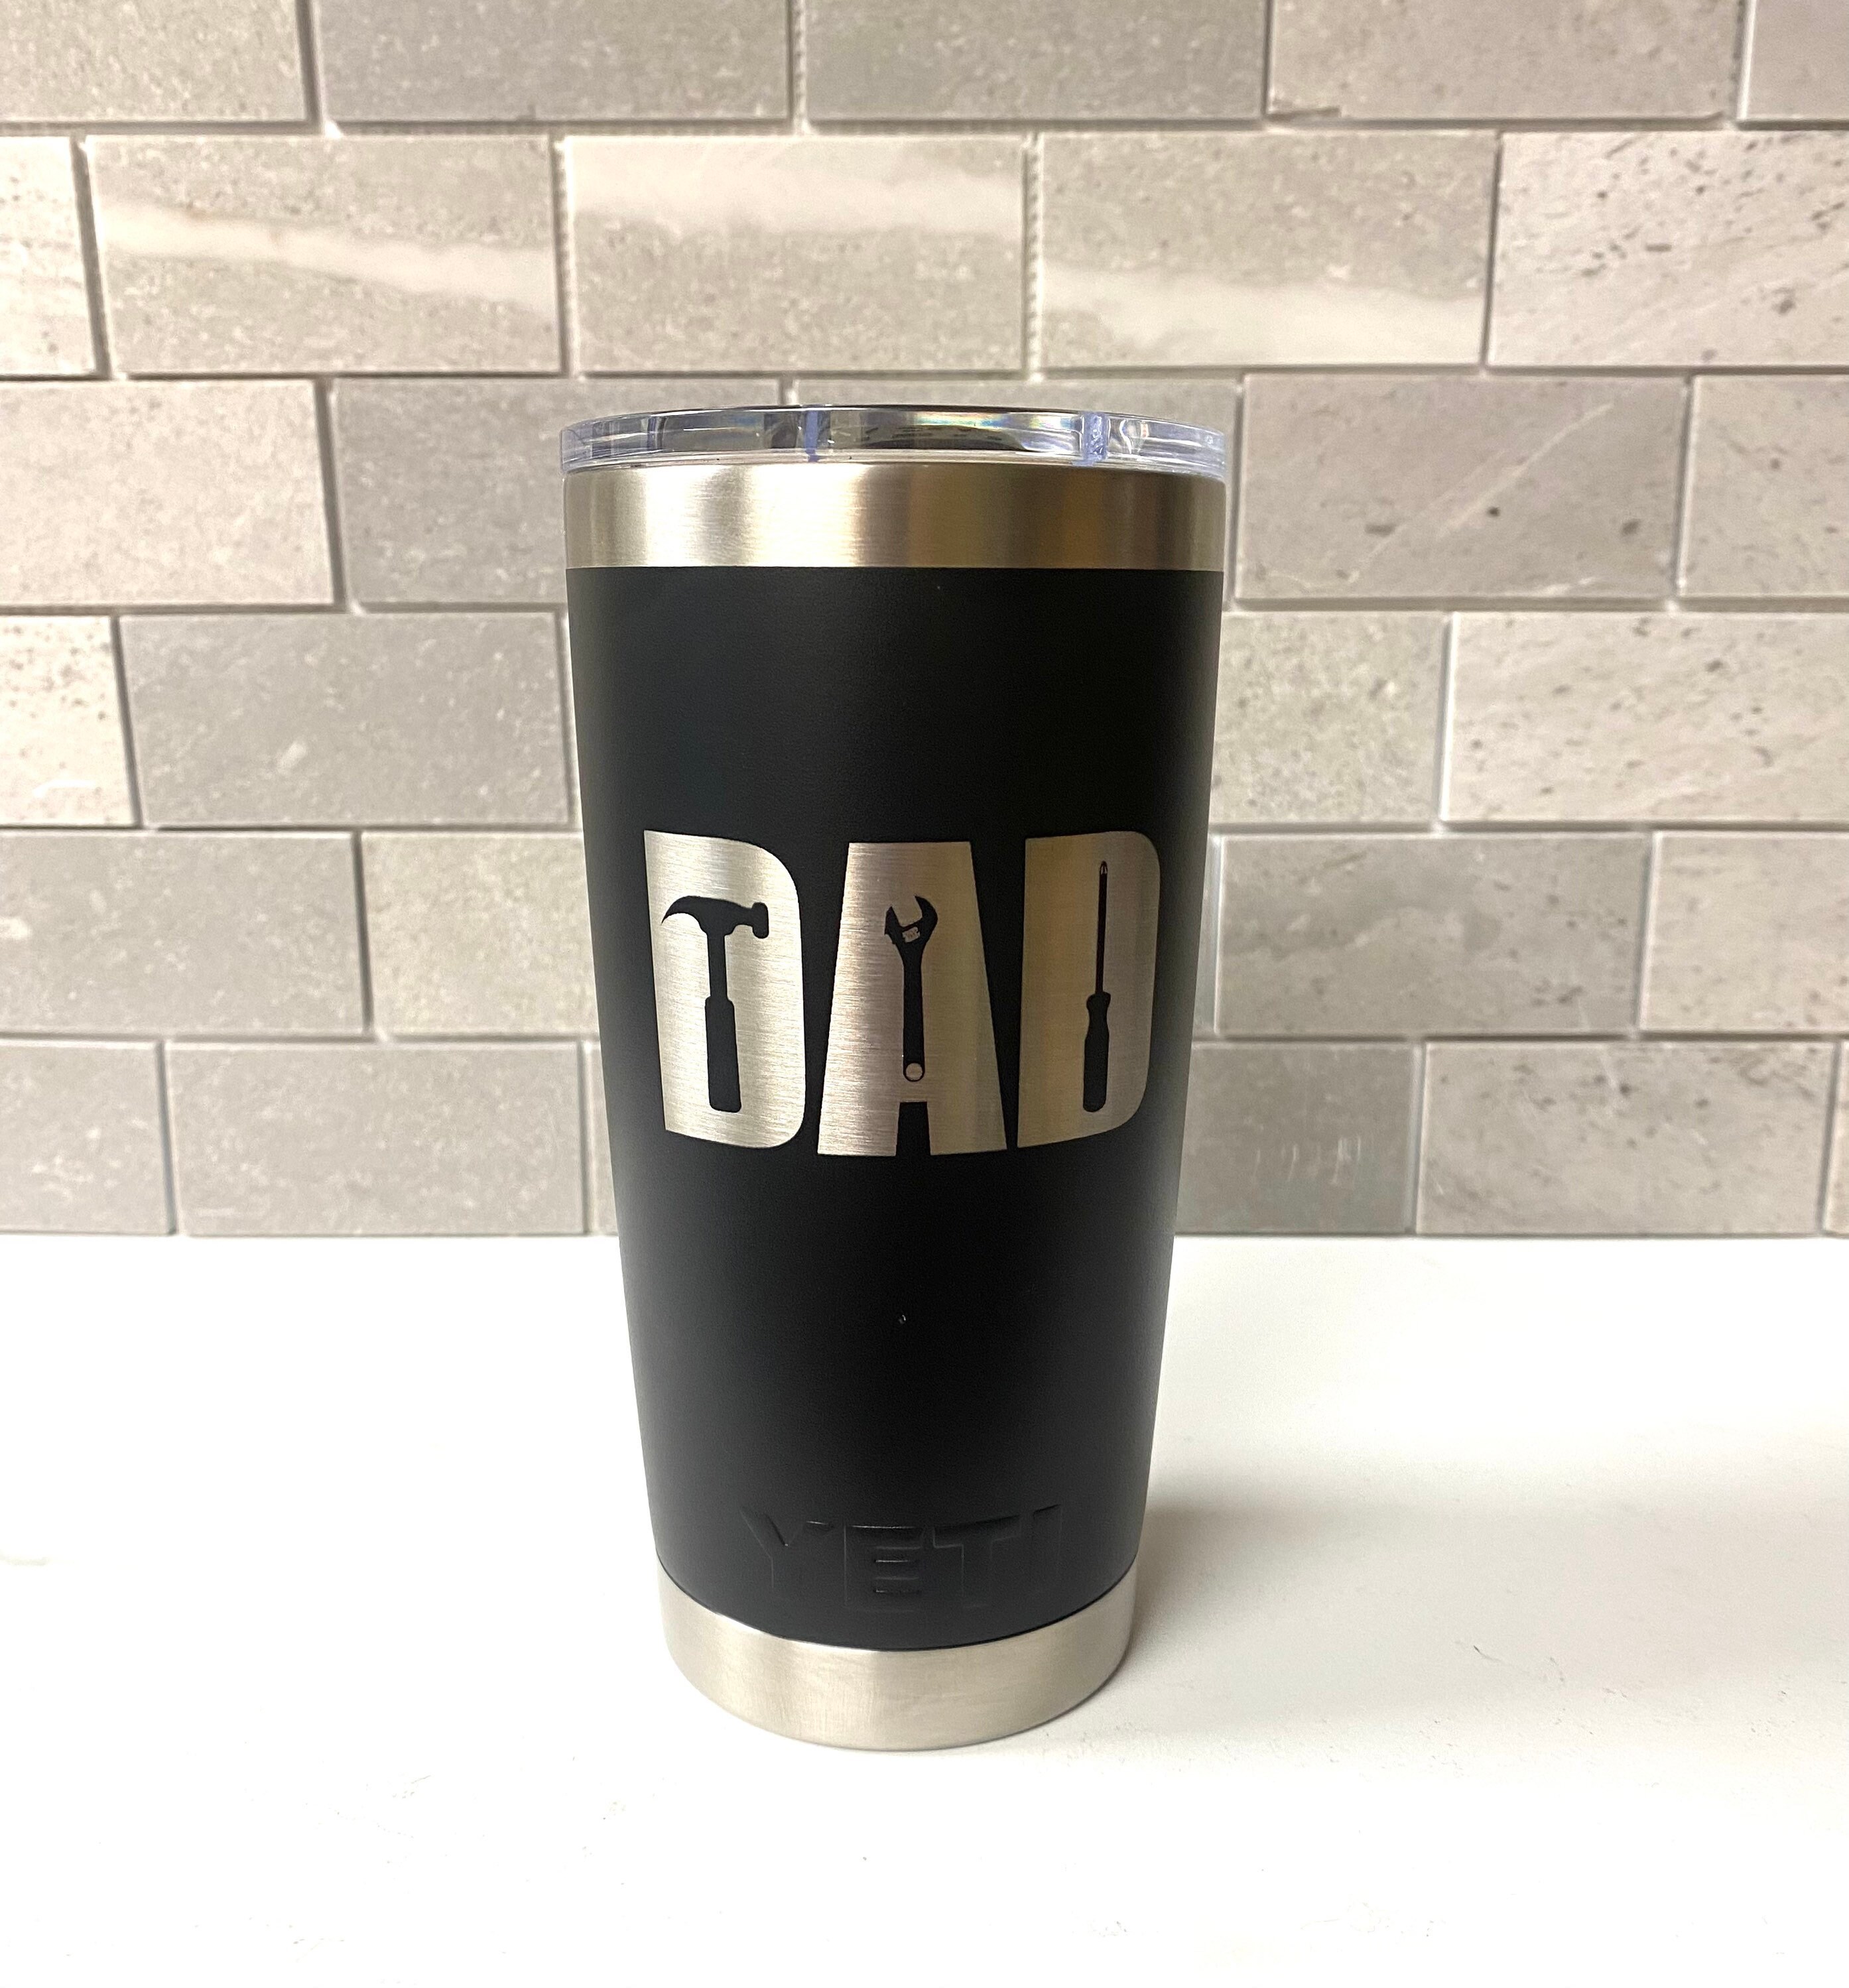 Yeti Mag slider top, Magnet lid, tumbler, rambler, personalized magnet  slider and custom text and custom logos, Made in USA